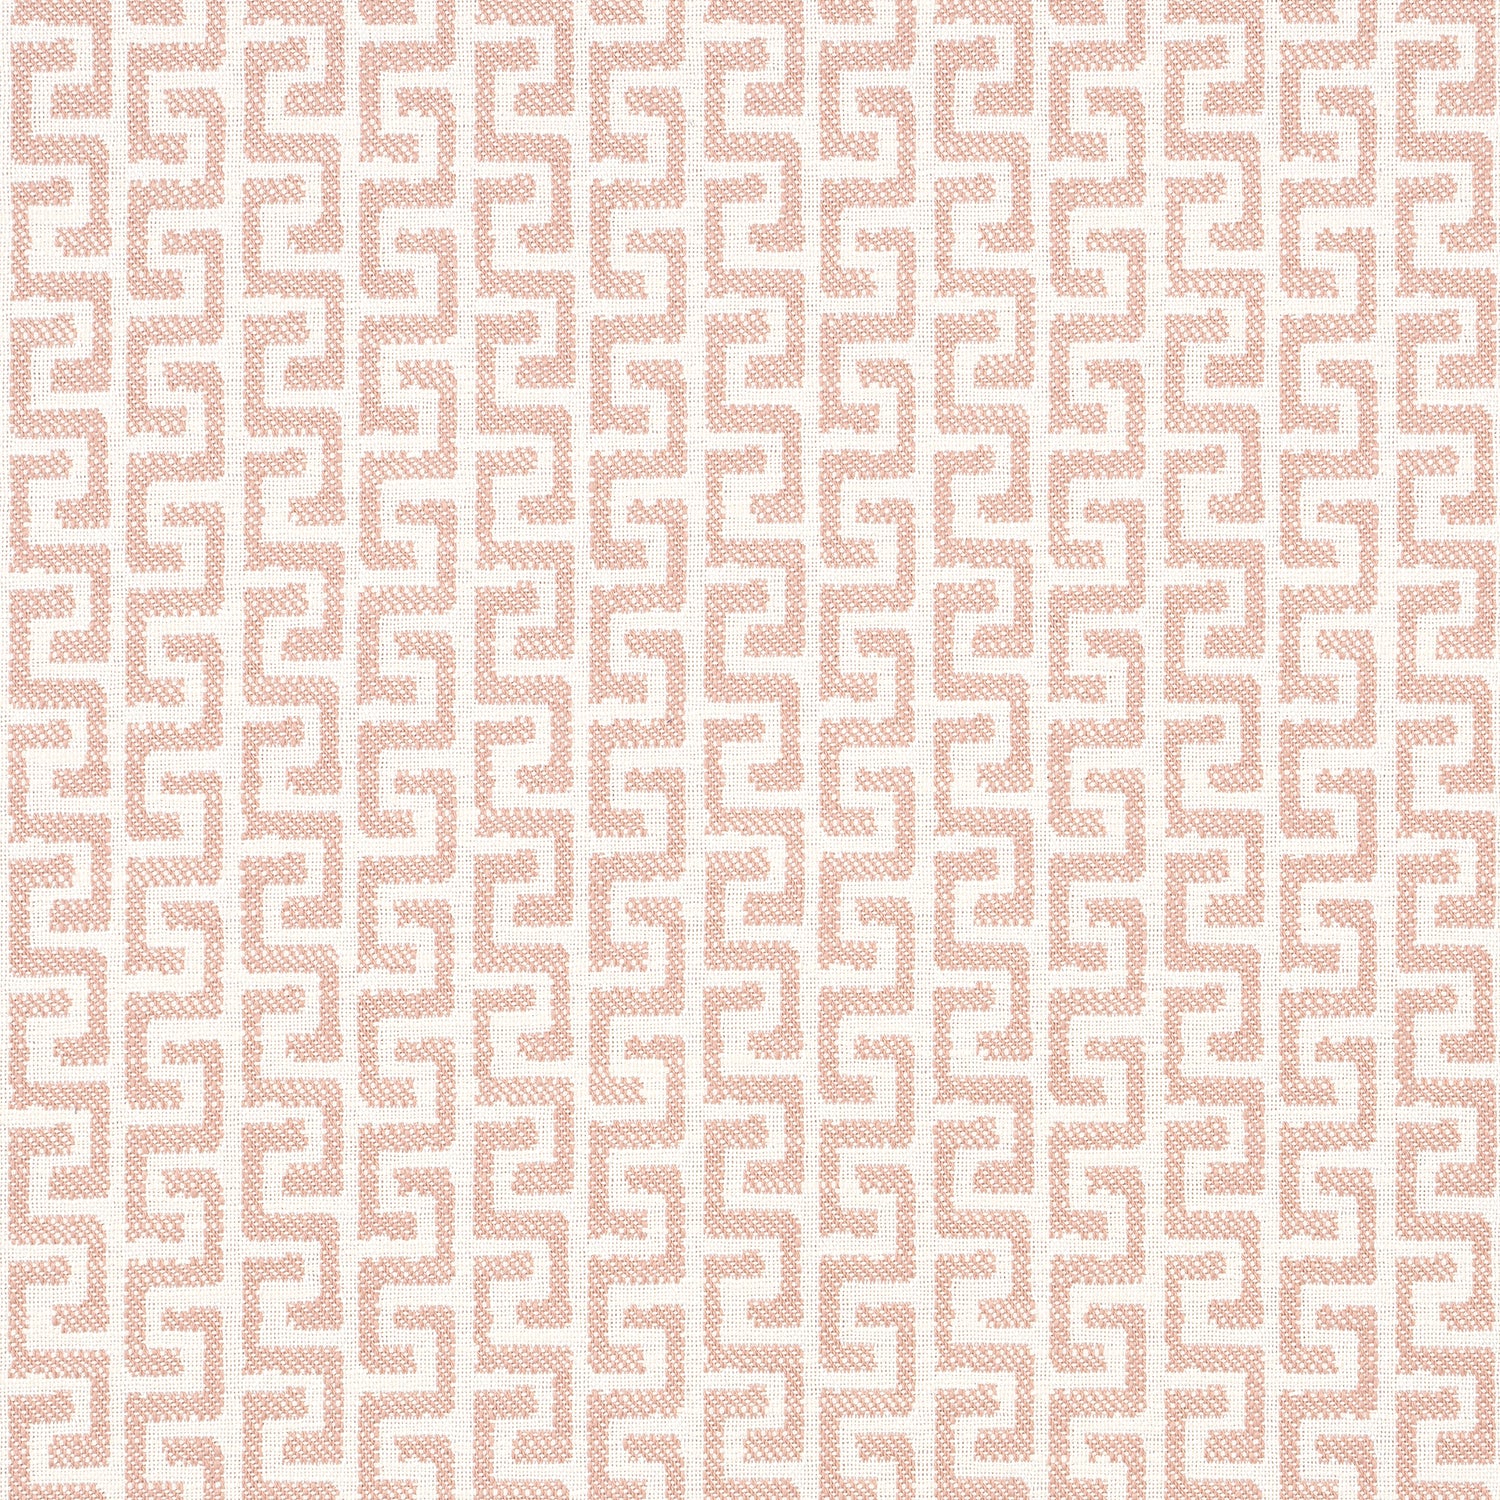 Merritt fabric in blush color - pattern number W74250 - by Thibaut in the Passage collection